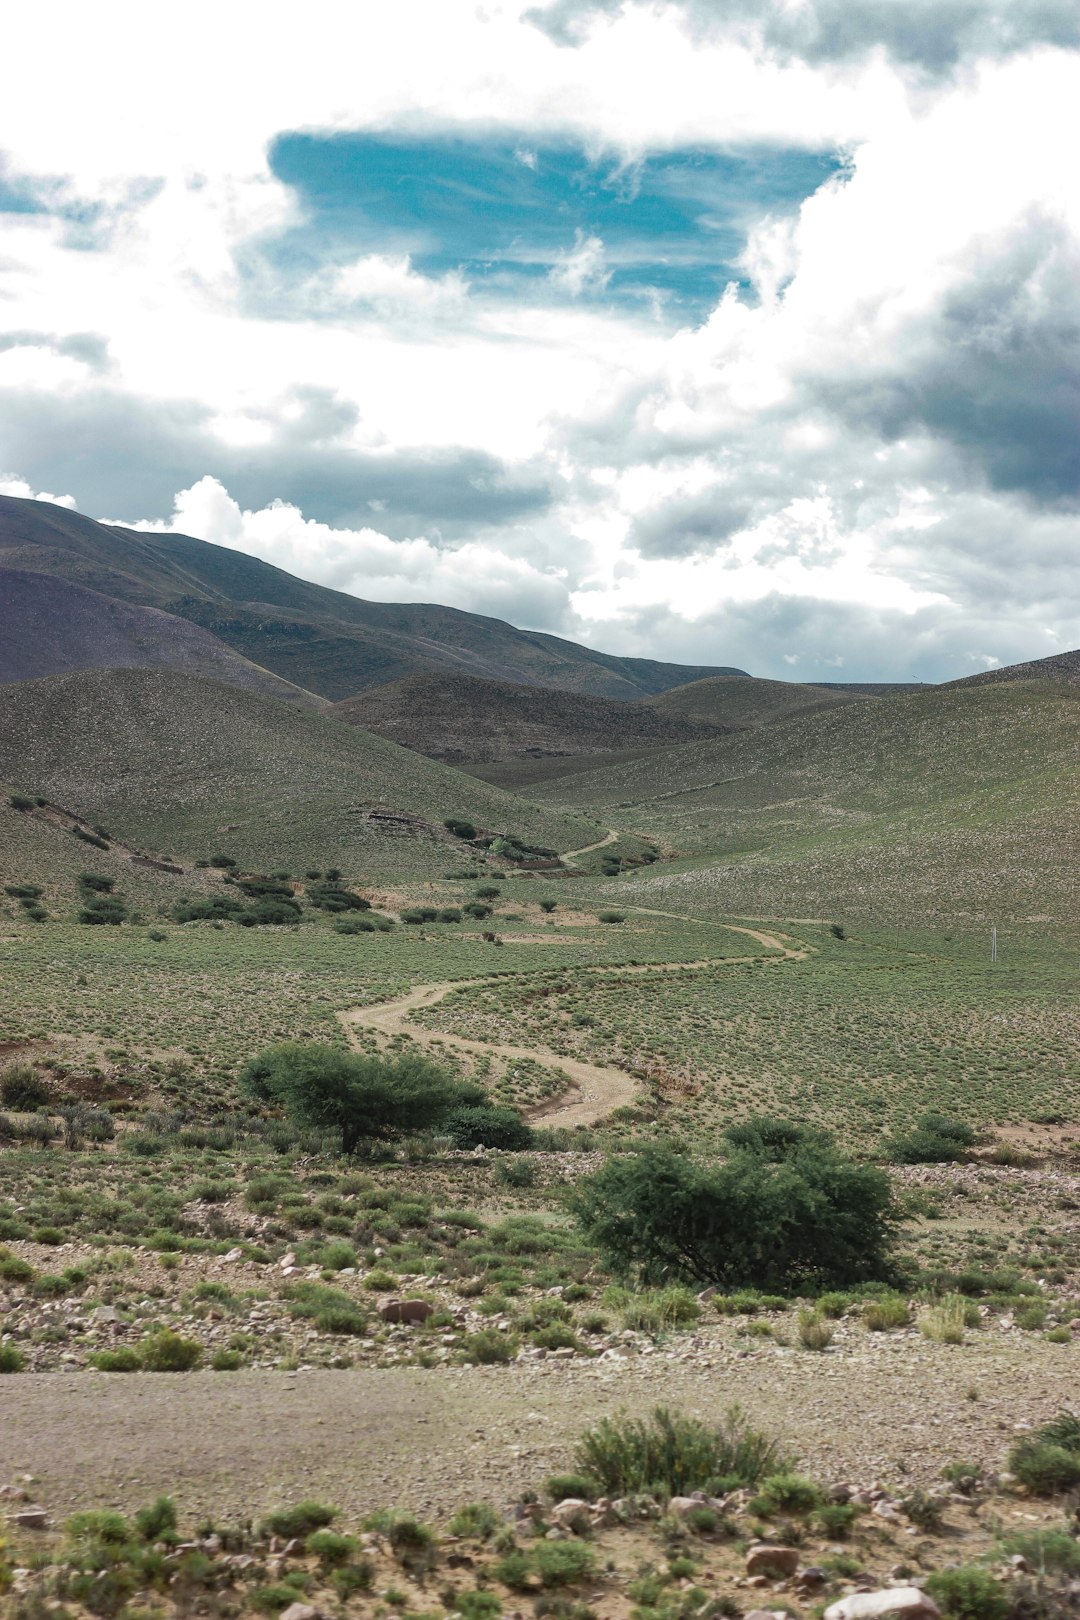 travelers stories about Hill in Jujuy, Argentina